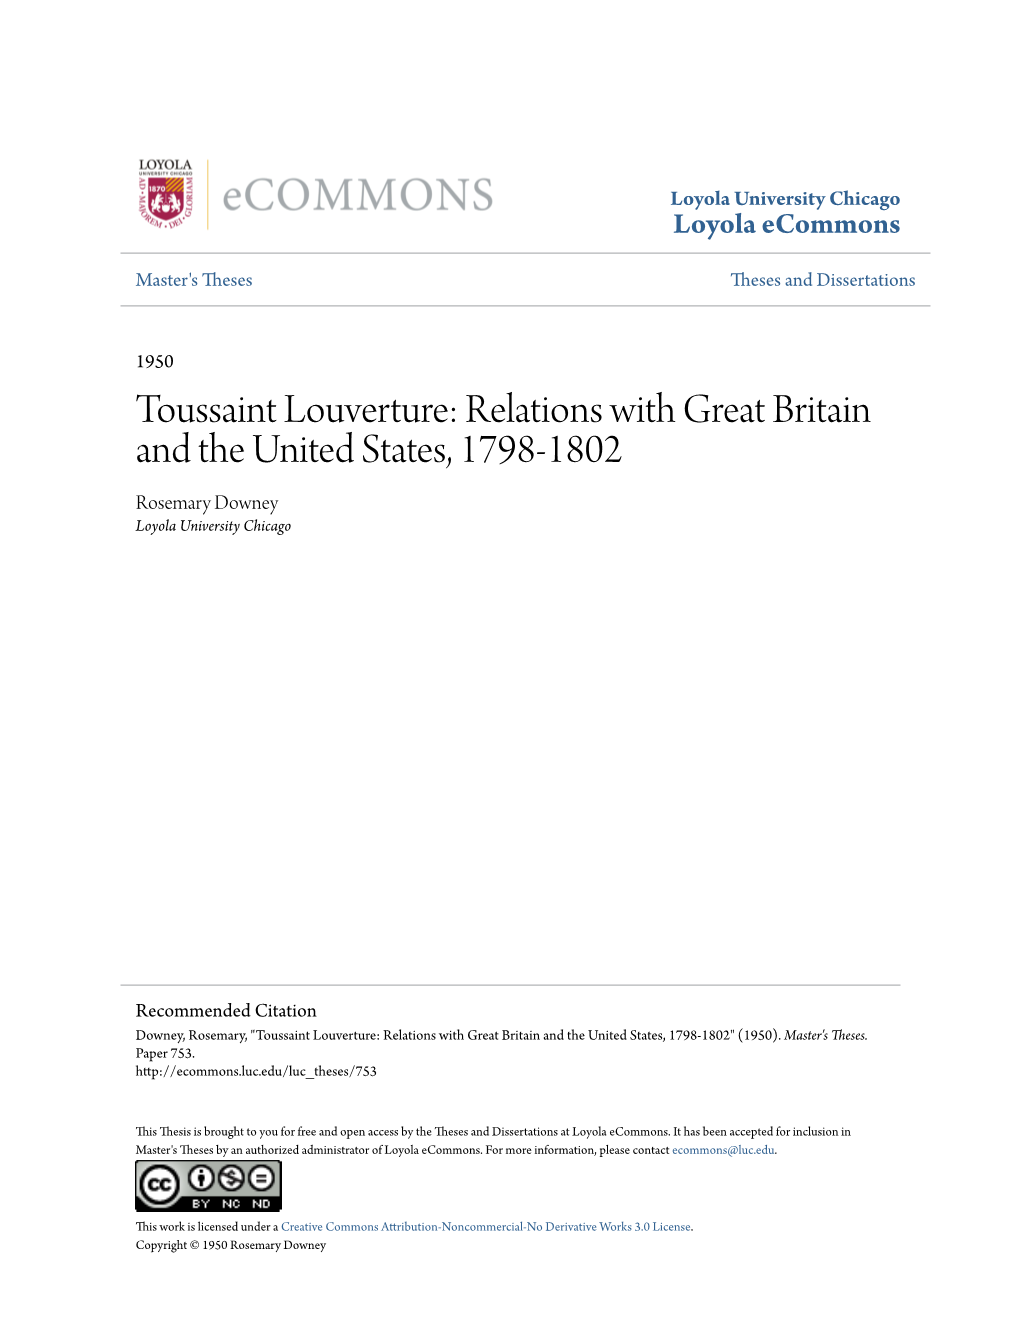 Toussaint Louverture: Relations with Great Britain and the United States, 1798-1802 Rosemary Downey Loyola University Chicago